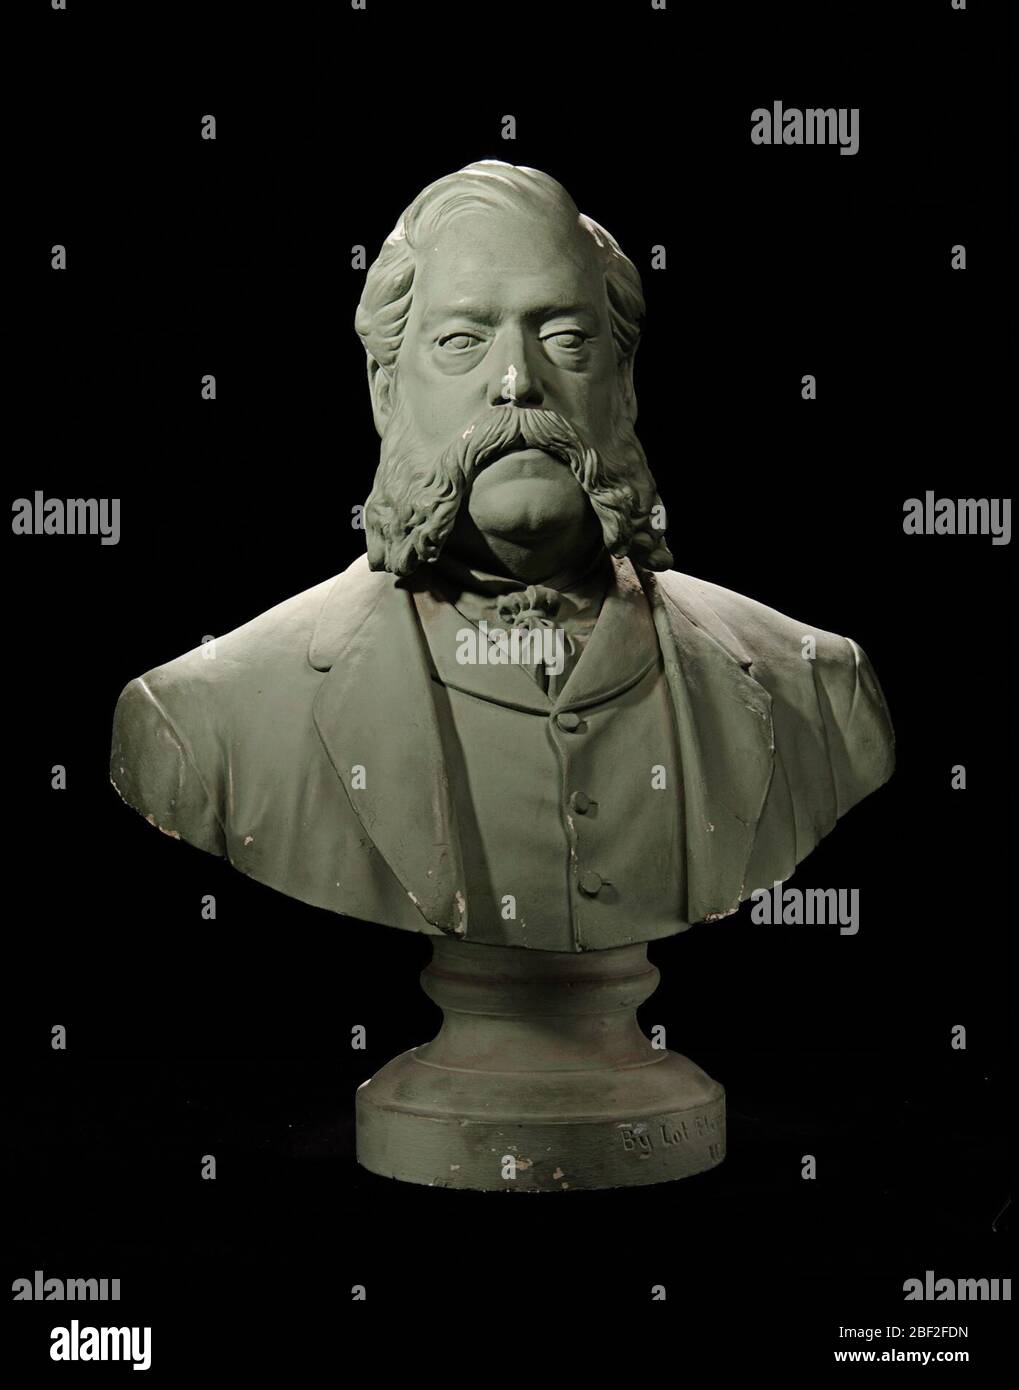 Chester Arthur. Scholars have disagreed about whether or not this bust actually represents the twenty-first president of the United States; further research might establish the circumstances surrounding its creation. Stock Photo